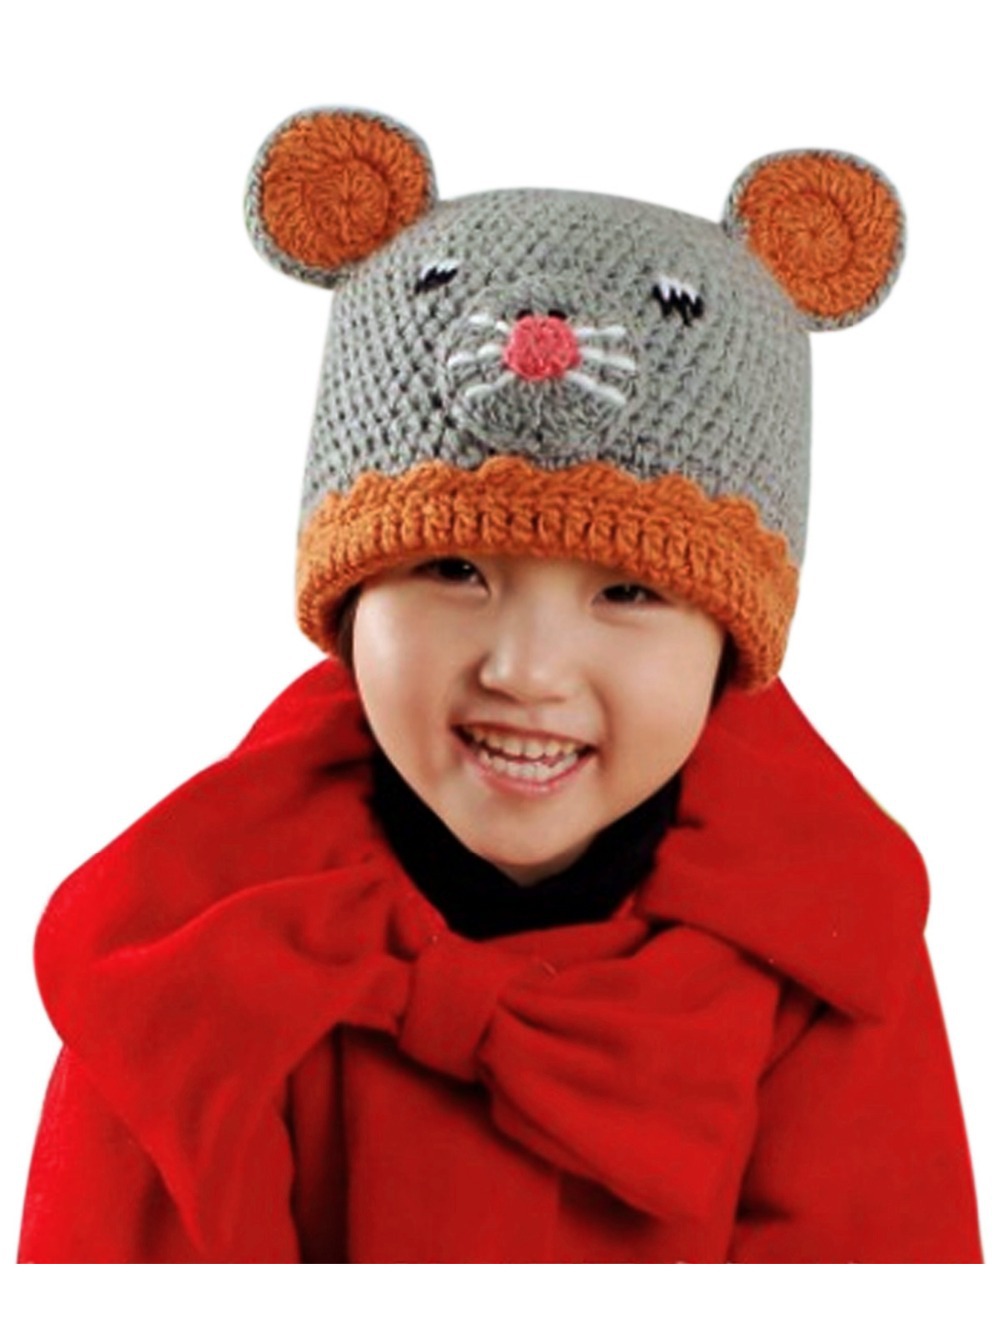 ... Cute Winter Iceland Yarn Cat Mouse Dog Baby Hat for 2-8 YRS Children ... - Cute-Winter-Iceland-Yarn-Cat-Mouse-Dog-Baby-Hat-for-2-8-YRS-Children